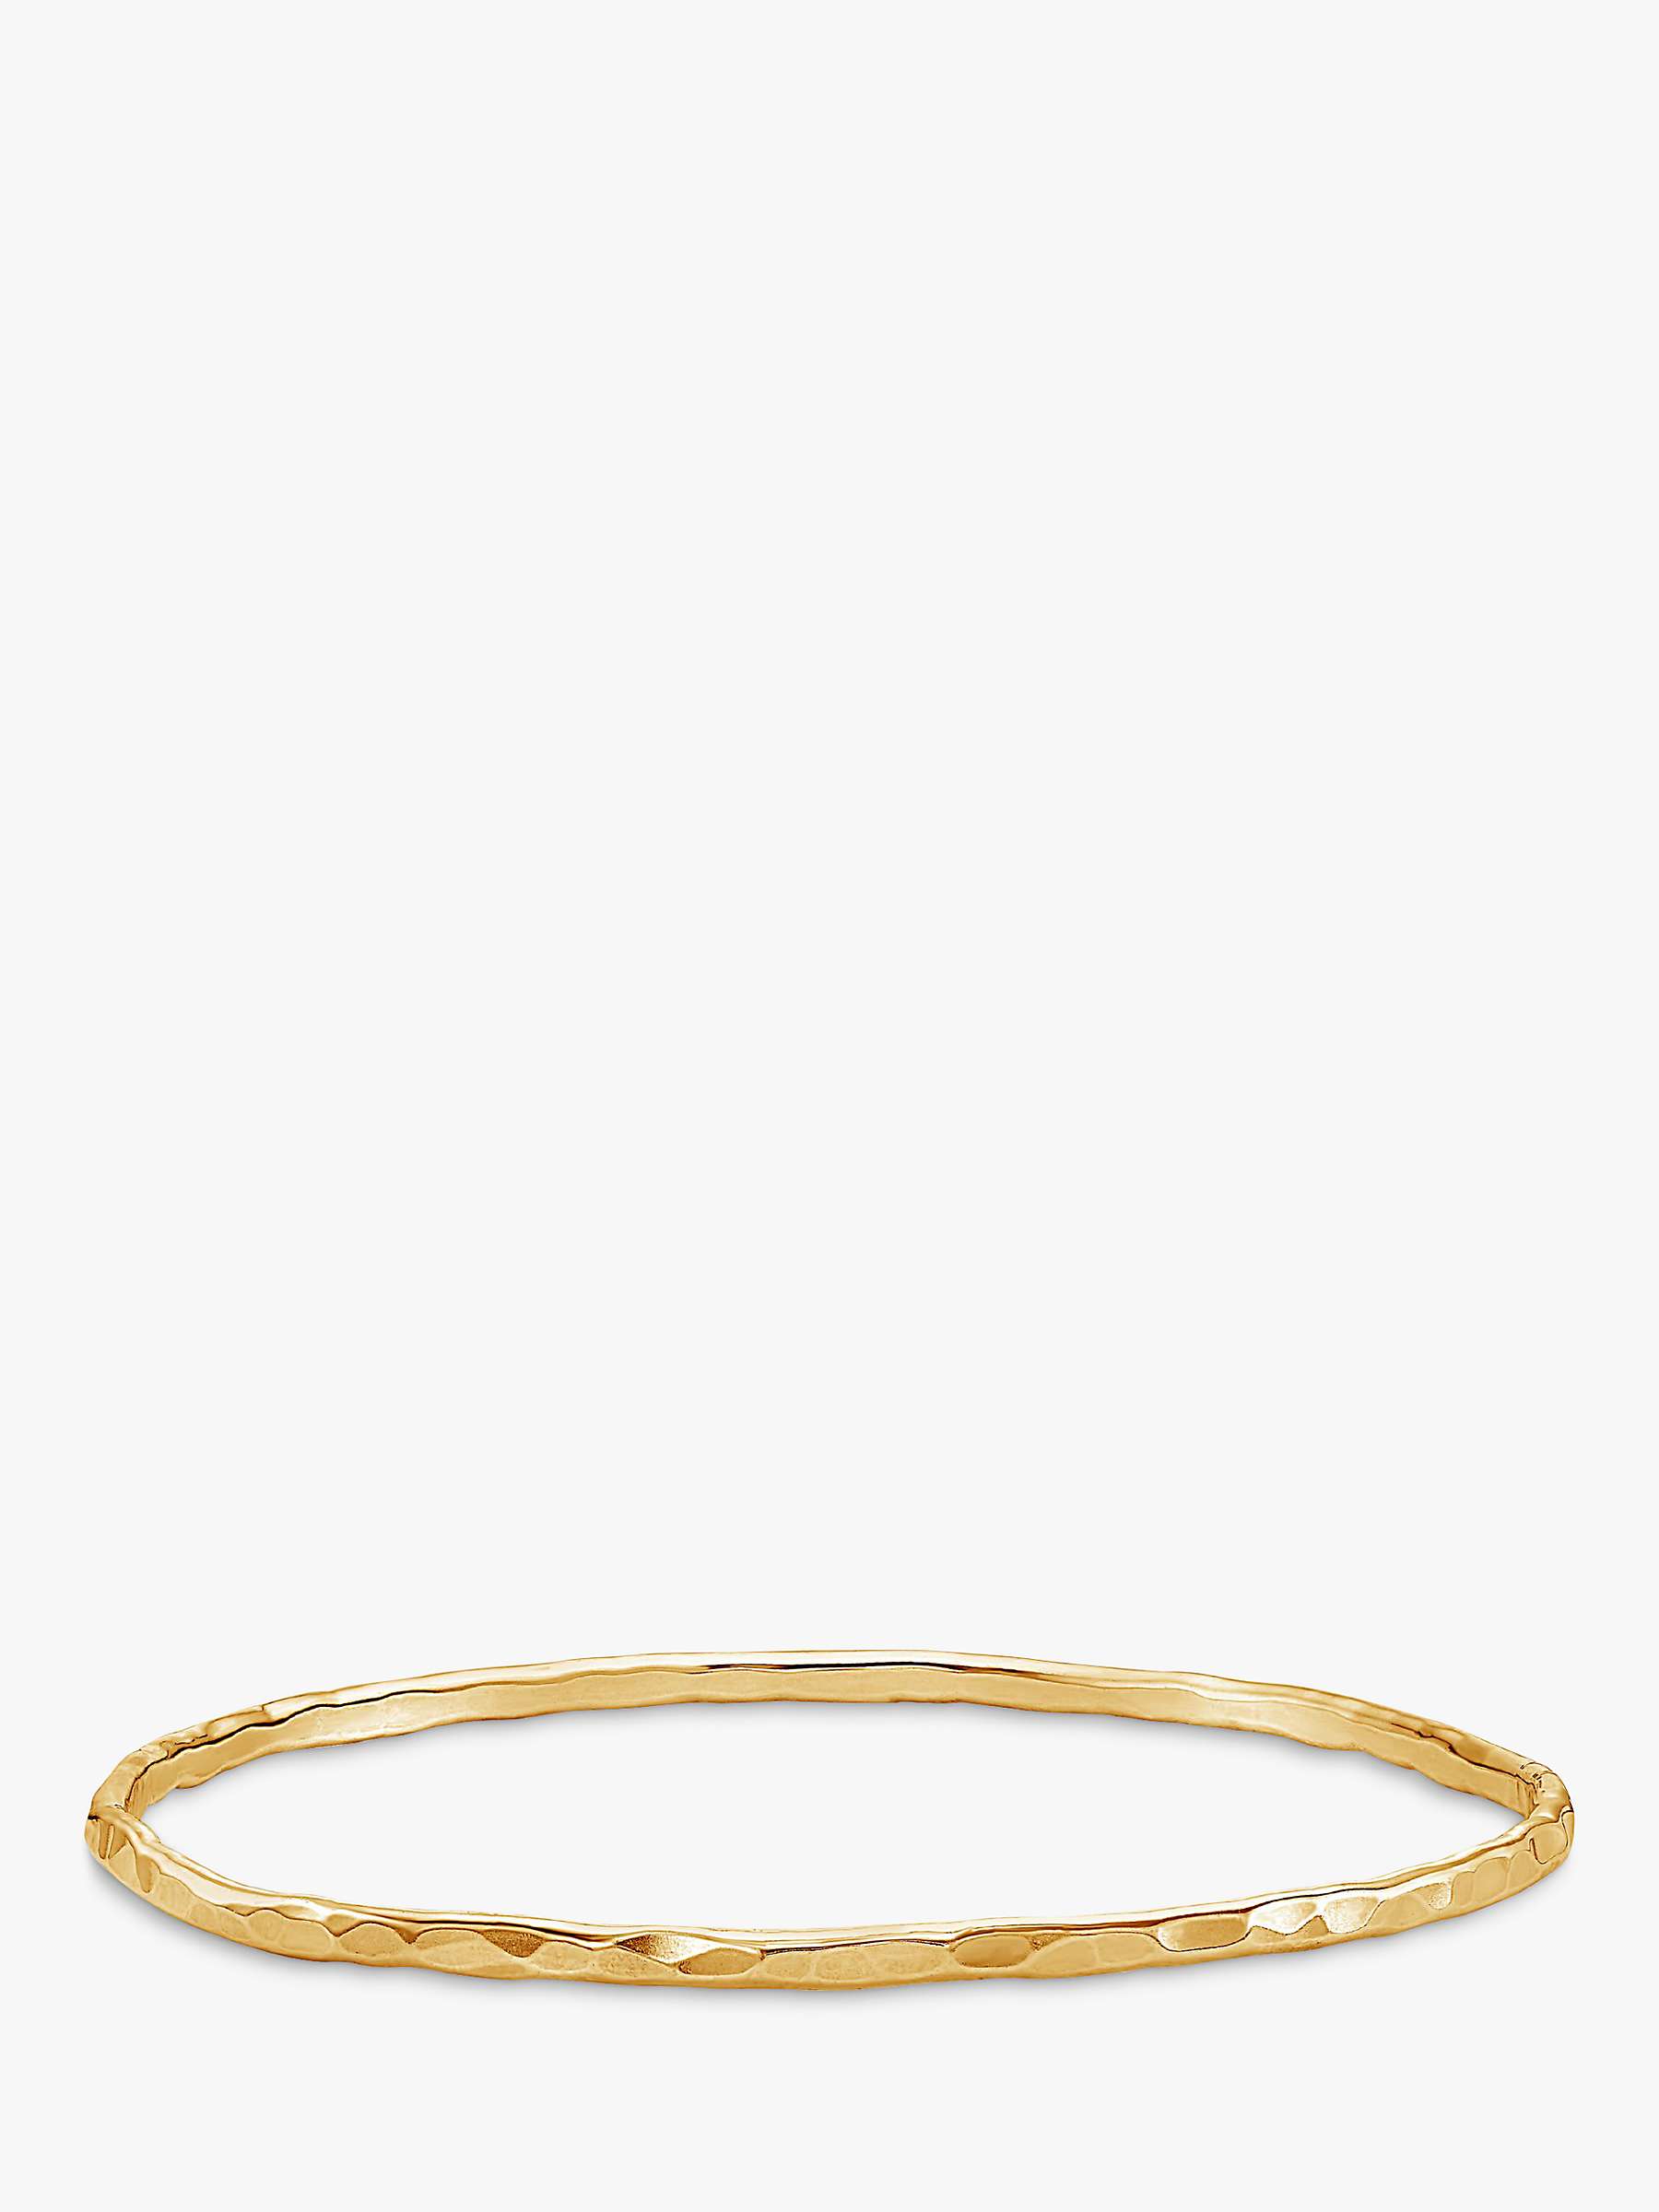 Buy Dower & Hall Hammered Bangle, Yellow Gold Online at johnlewis.com